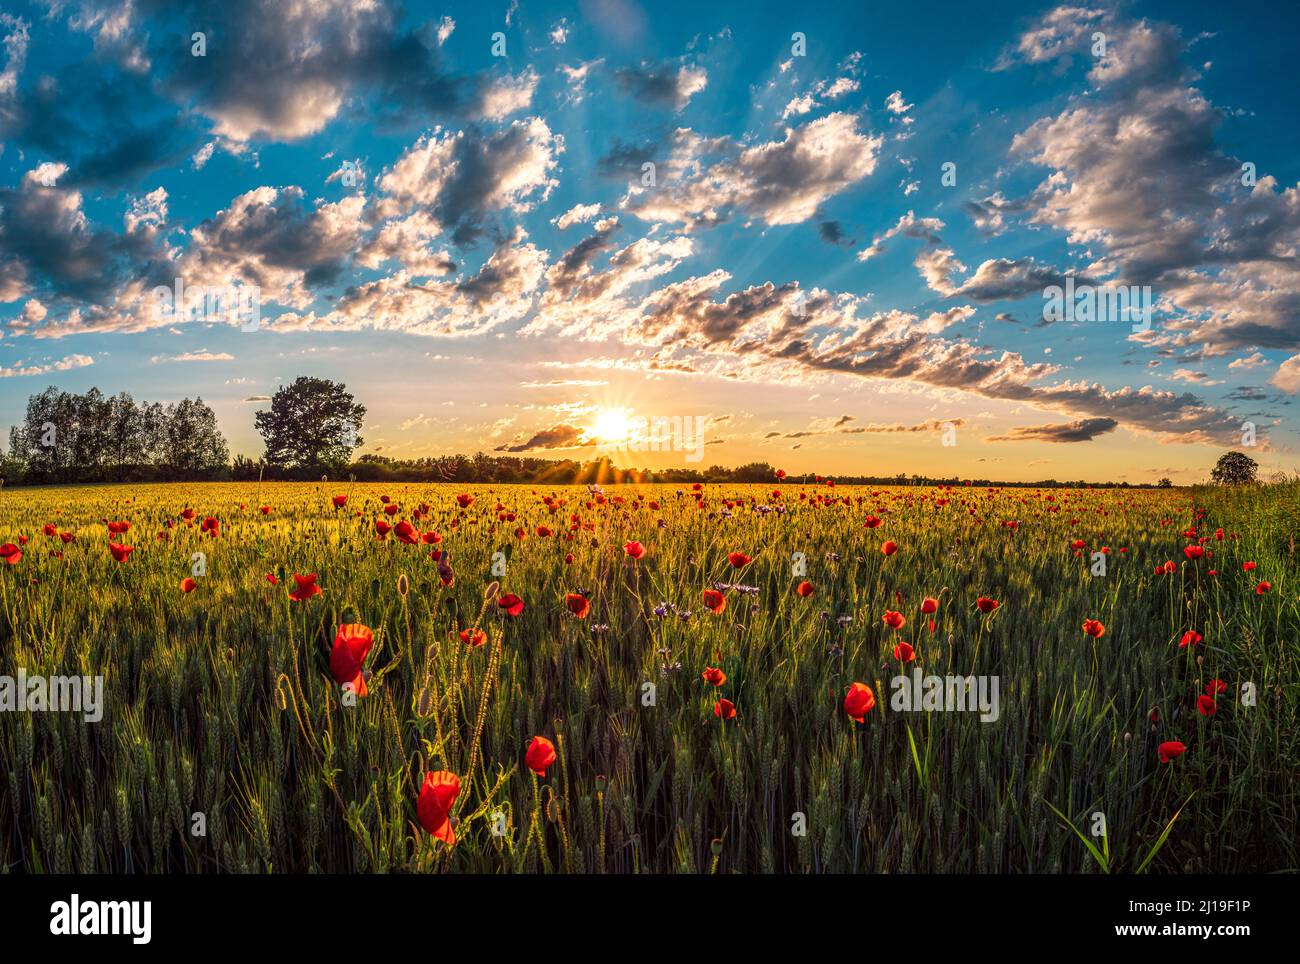 A breathtaking view of a field in Germany with the sun shining on red poppy flowers and corn from a cloudy sky Stock Photo